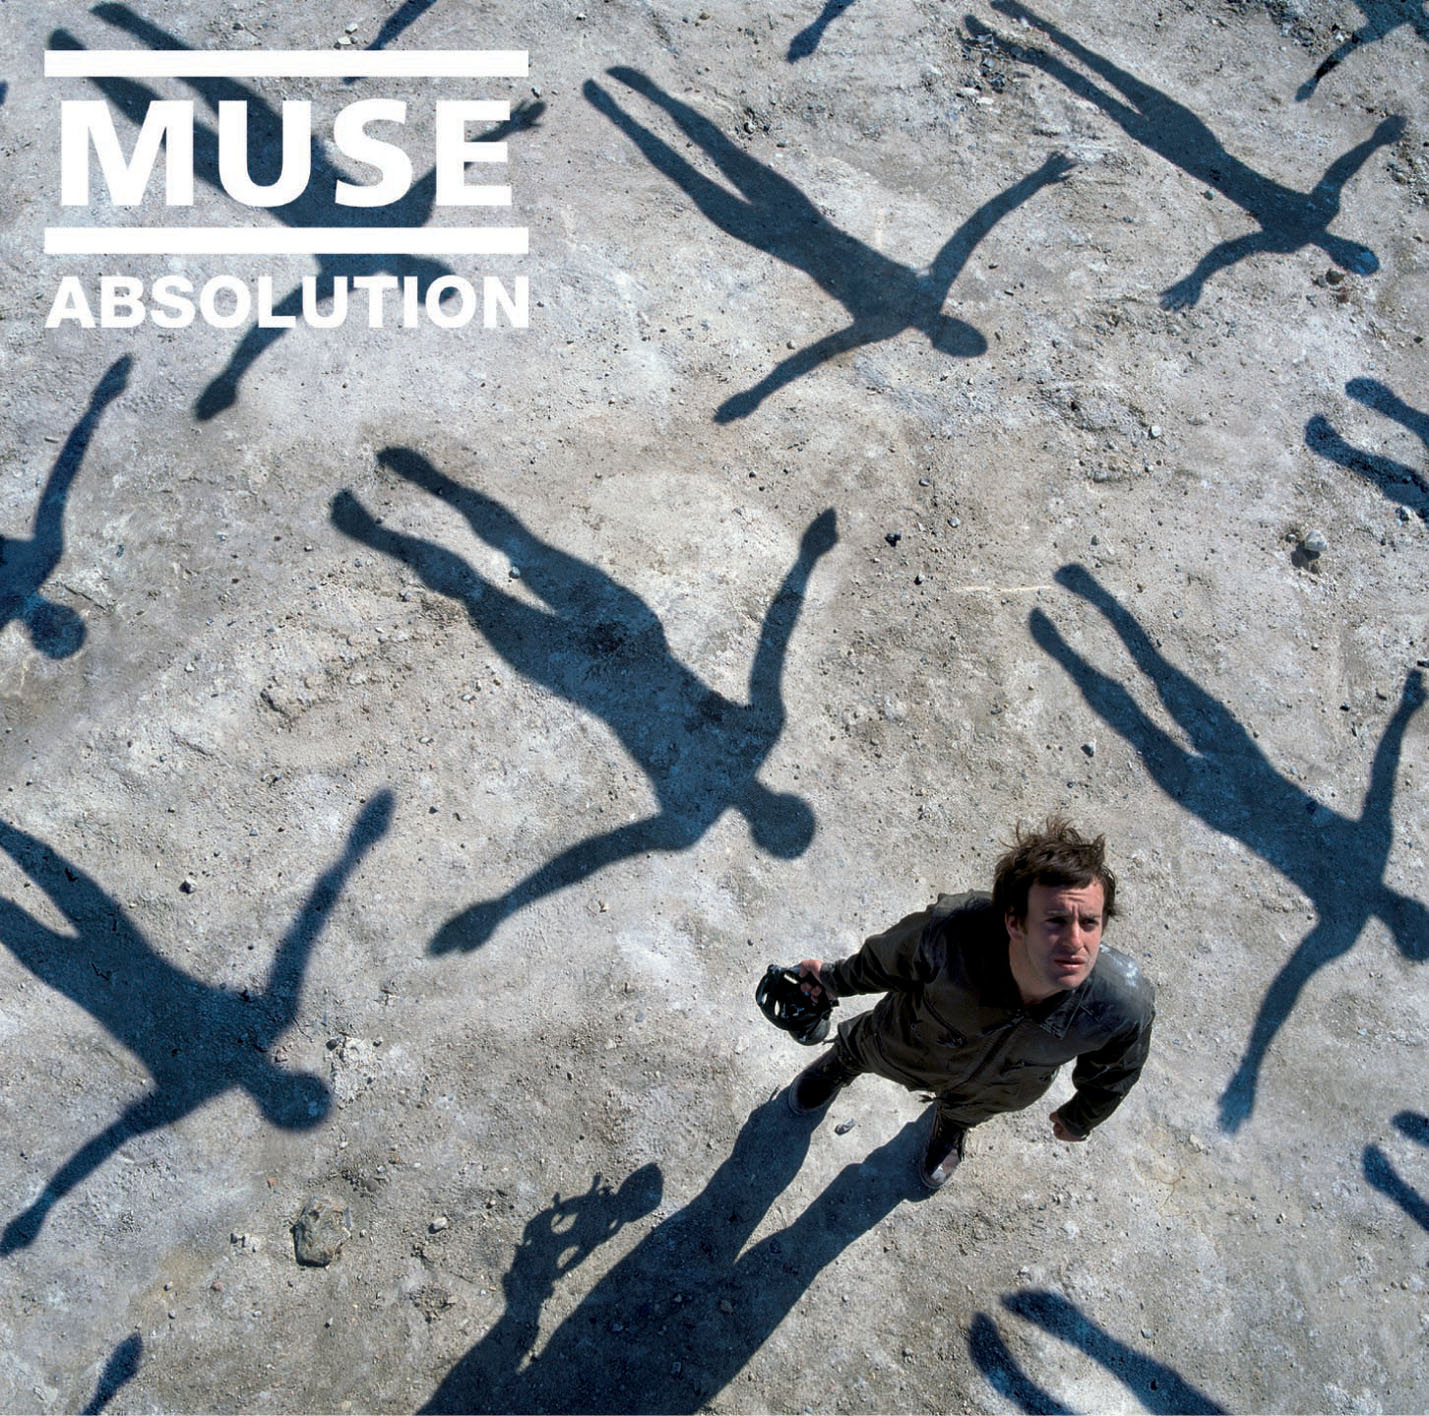 Absolution #2